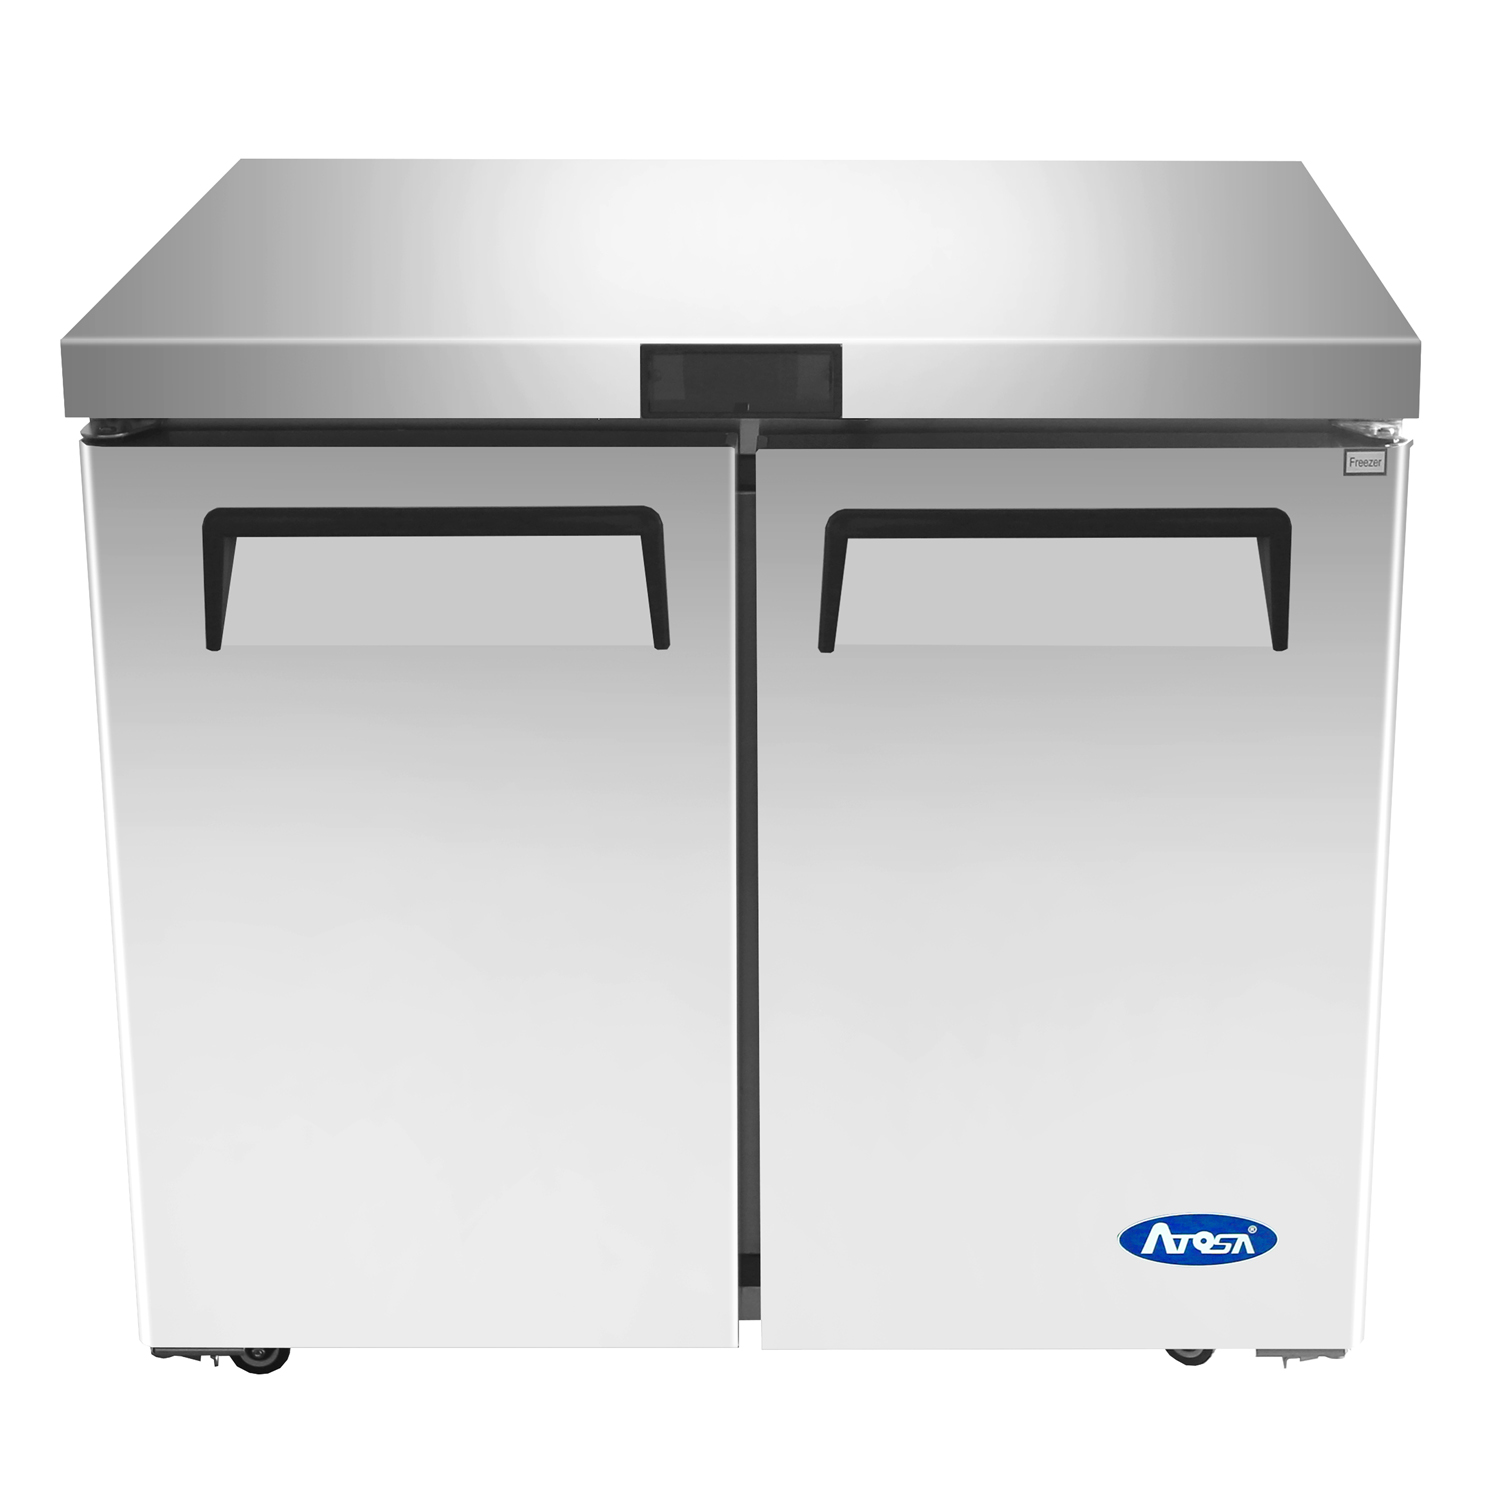 Atosa Two Section Undercounter Reach-In Refrigerator MGF36RGR, 36-5/16"W, 8.7 cu. ft.